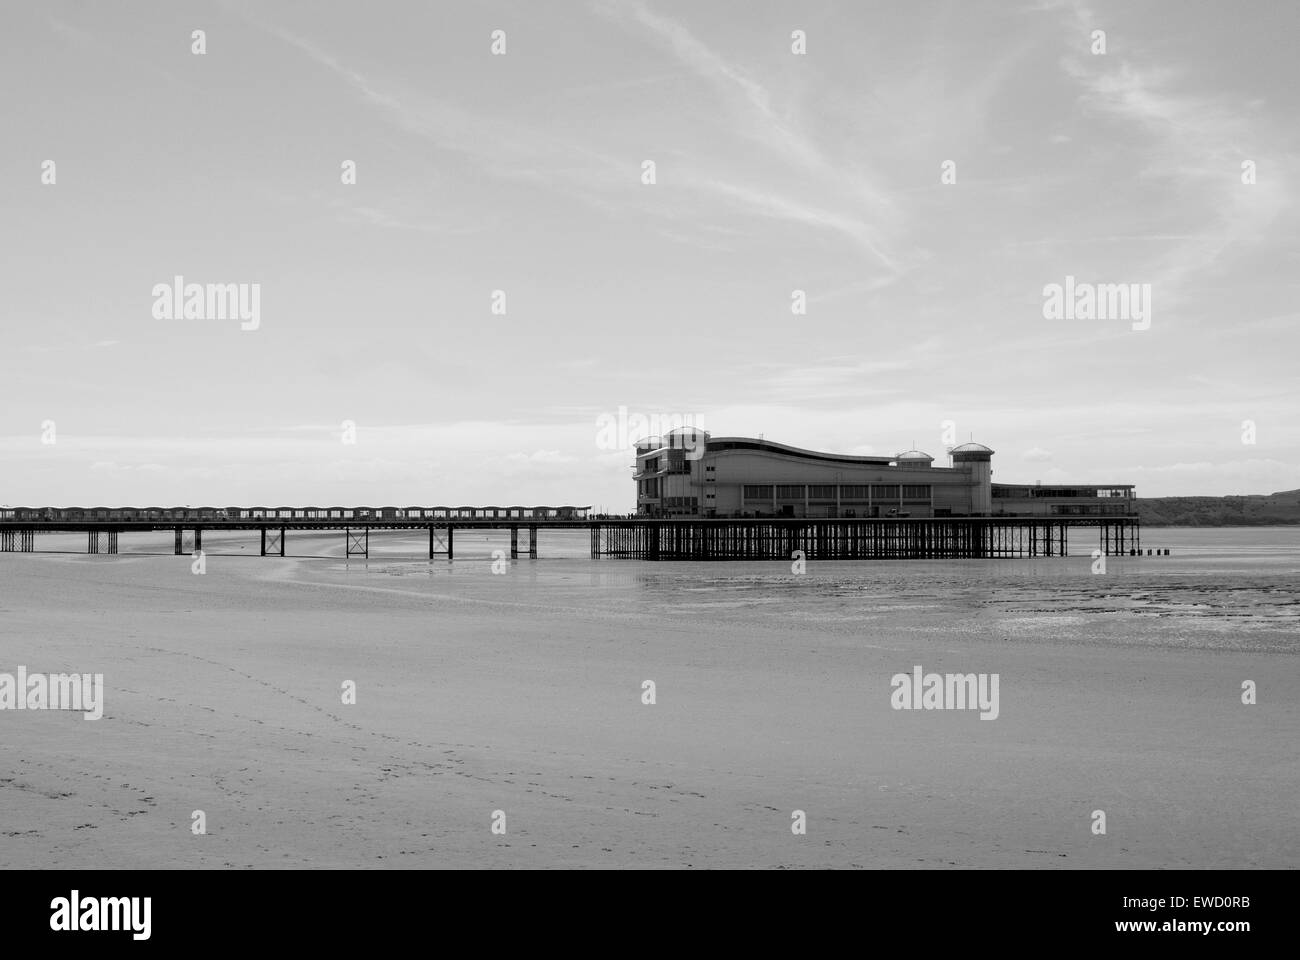 Editorial image of the Grand Pier and beach at Weston Super-Mare against blue summer skies and bathed in glorious sunshine Stock Photo